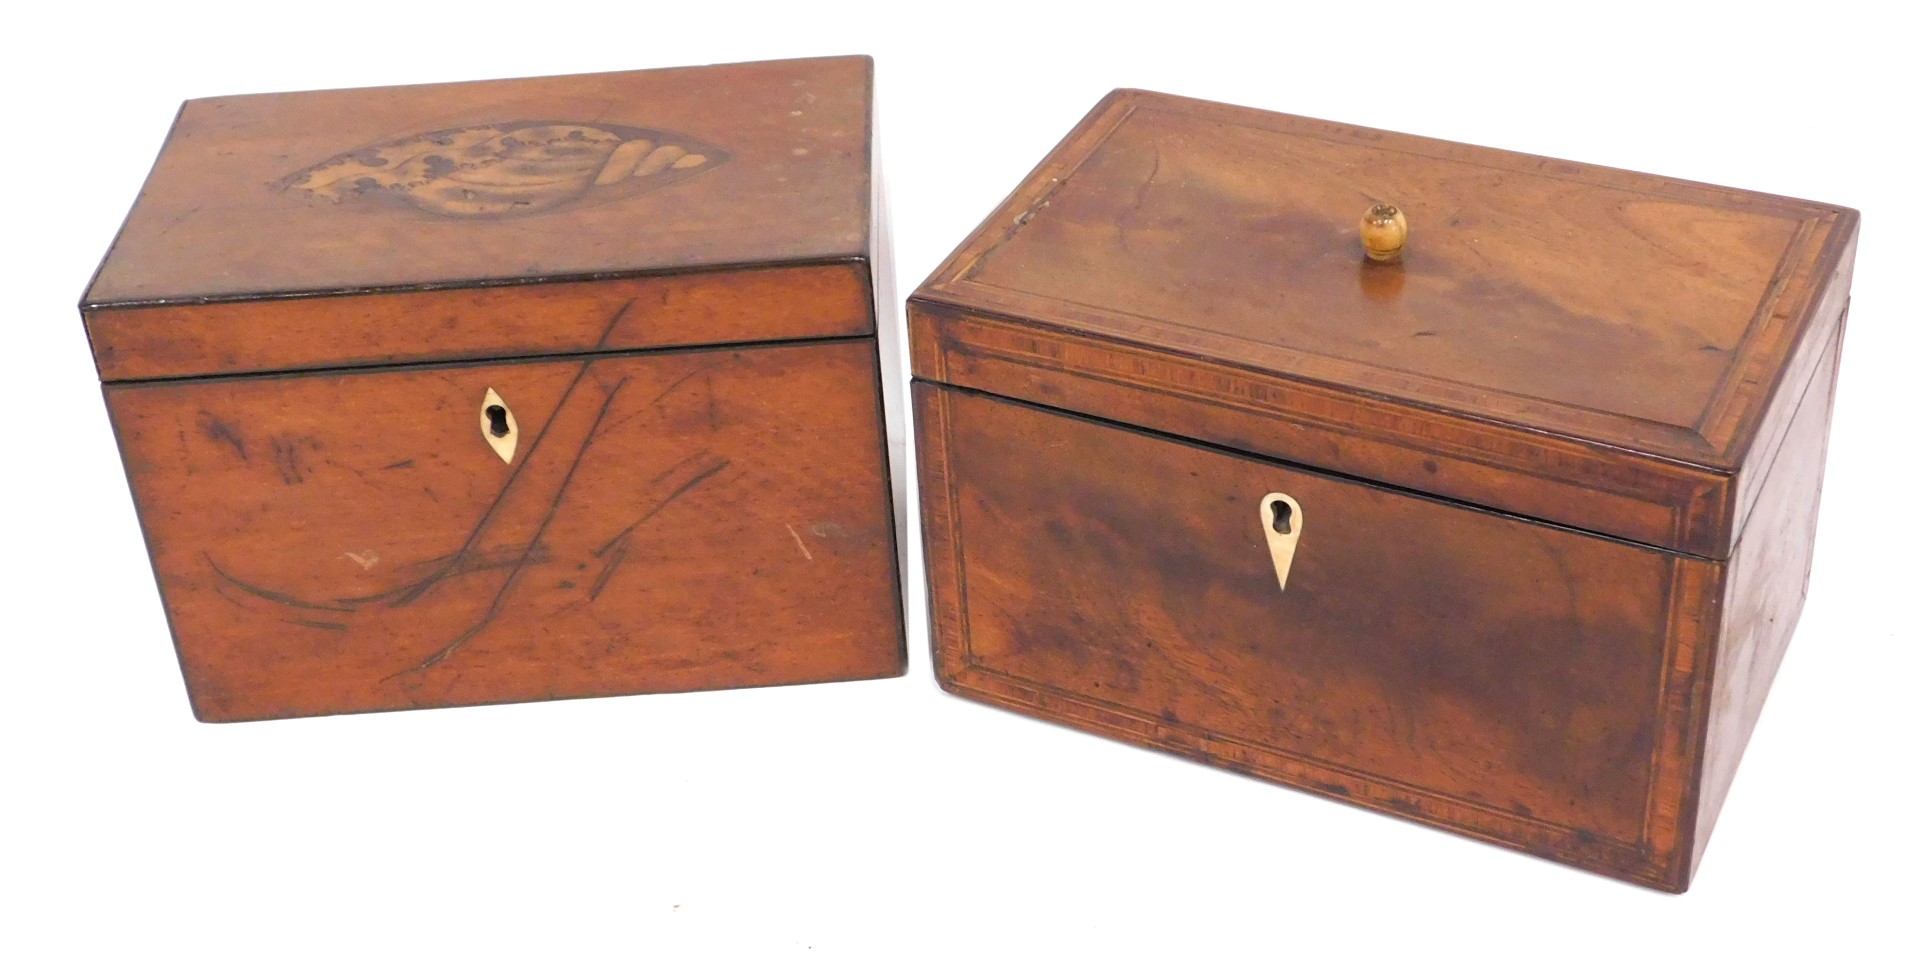 Two 19thC mahogany tea caddies, one with shell inlay and vacant interior, the other with rosewood cr